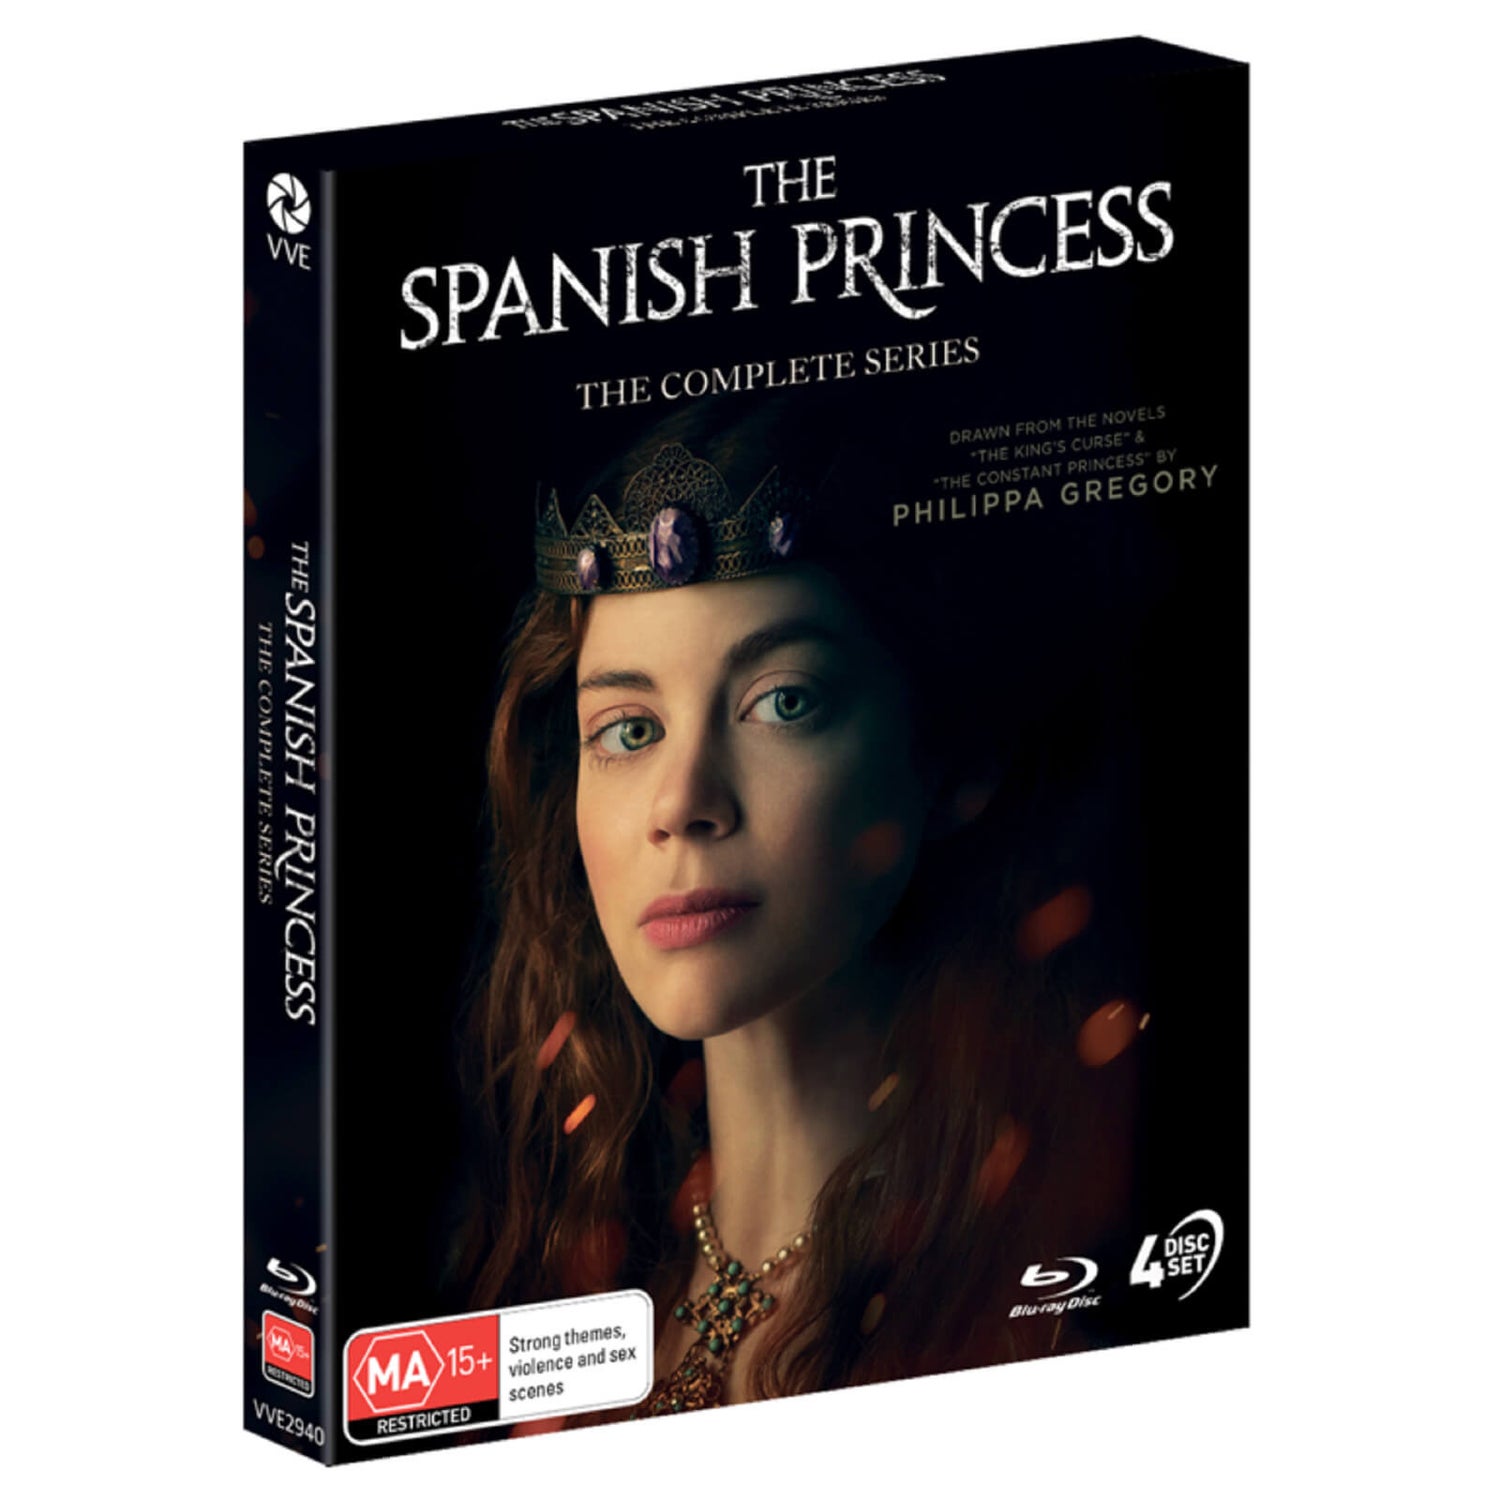 The Spanish Princess: The Complete Series